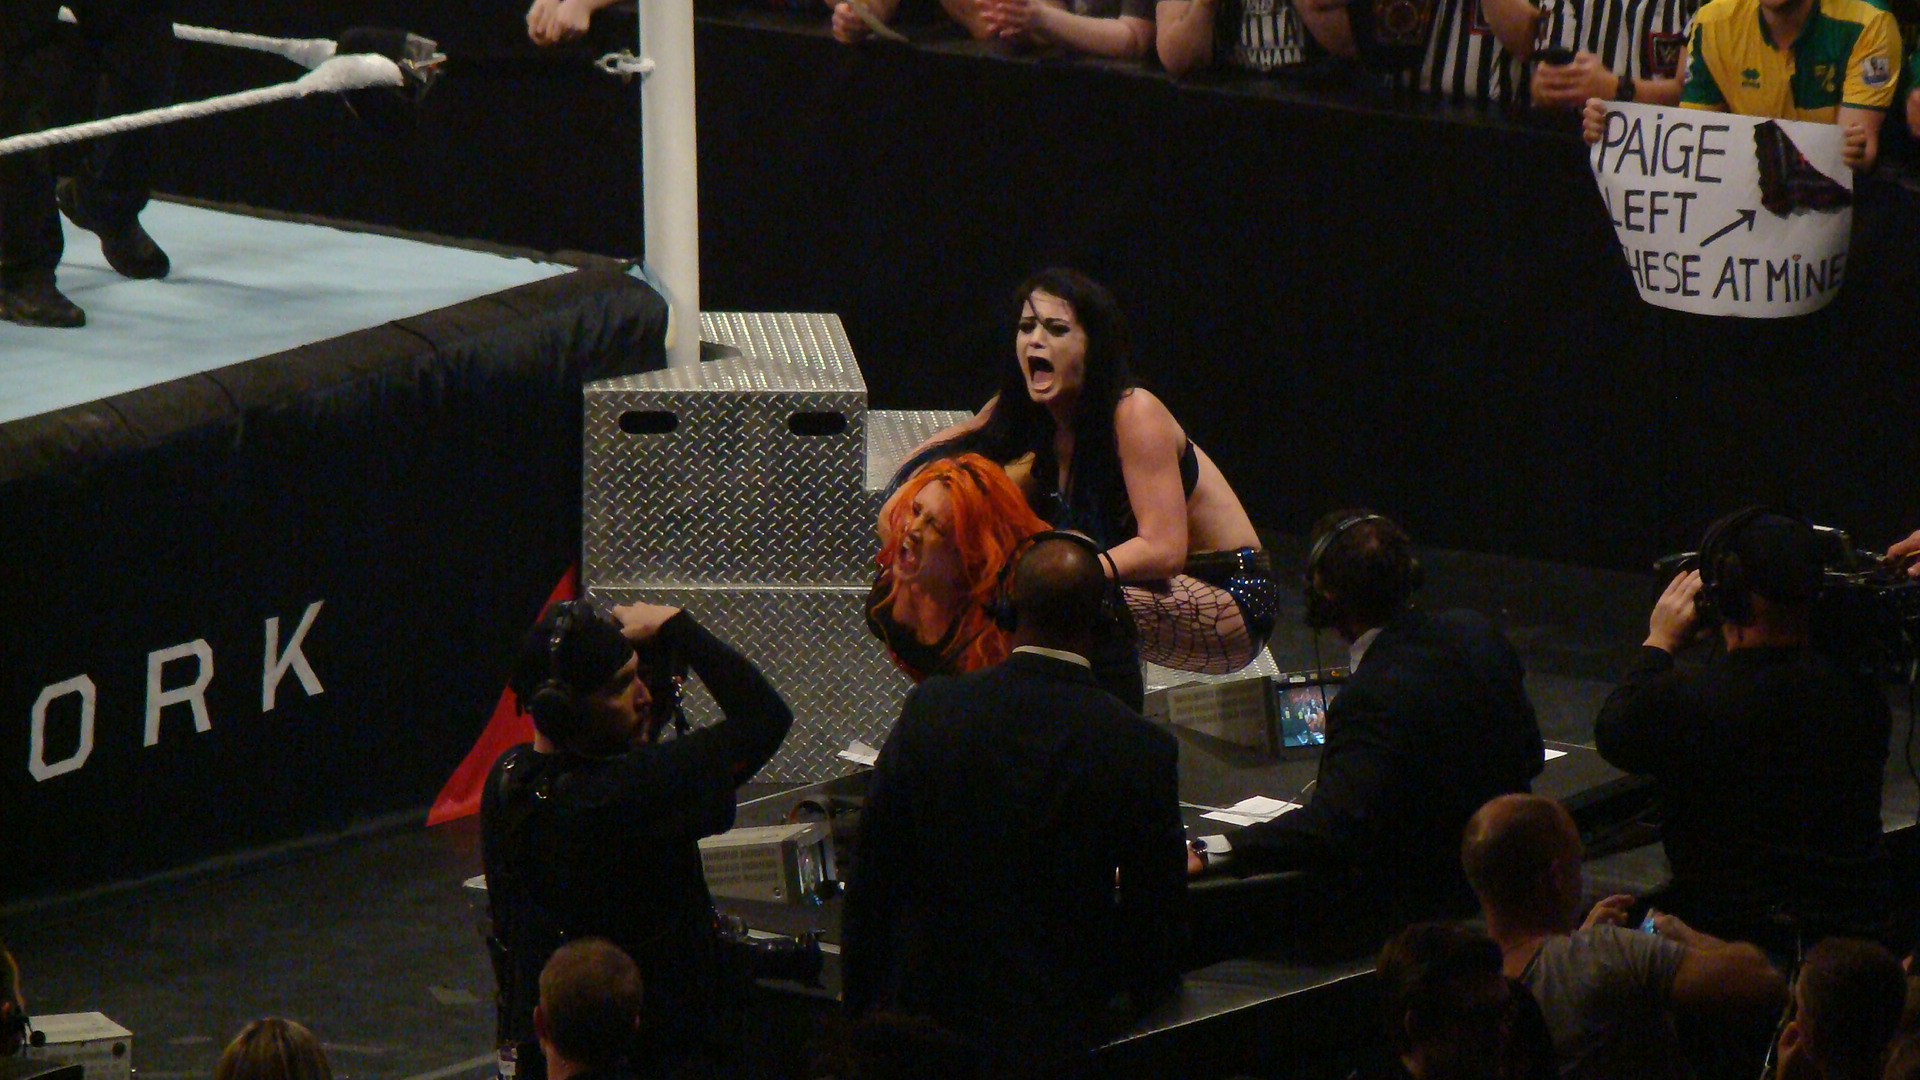 Paige and Becky Lynch